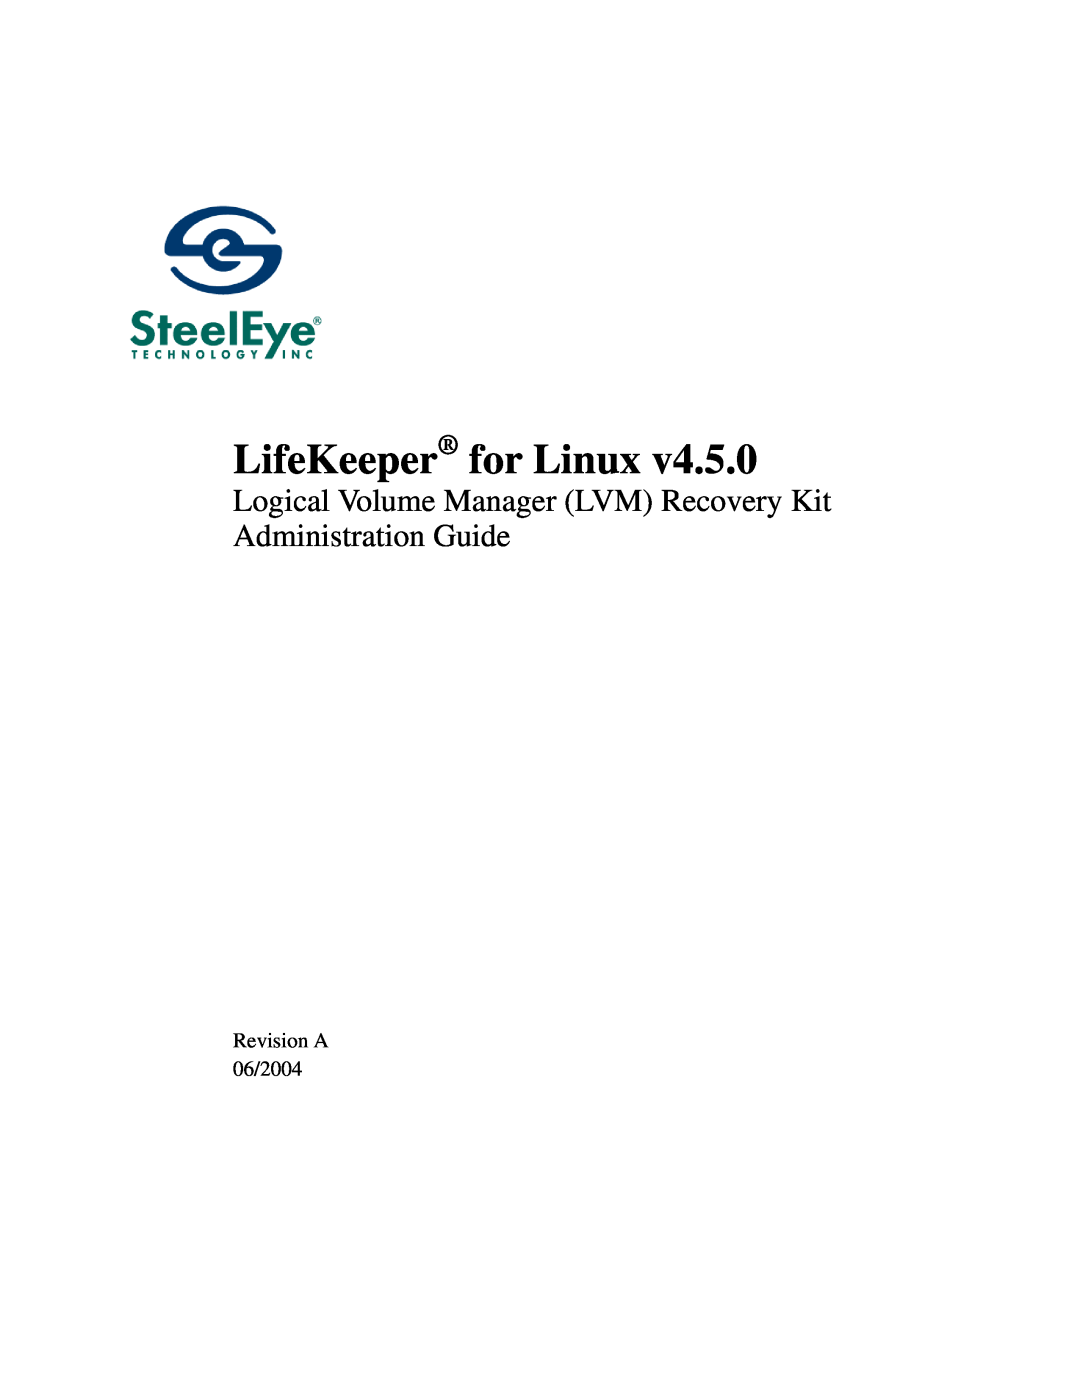 SteelEye 4.5.0 manual LifeKeeper for Linux, Logical Volume Manager LVM Recovery Kit Administration Guide 